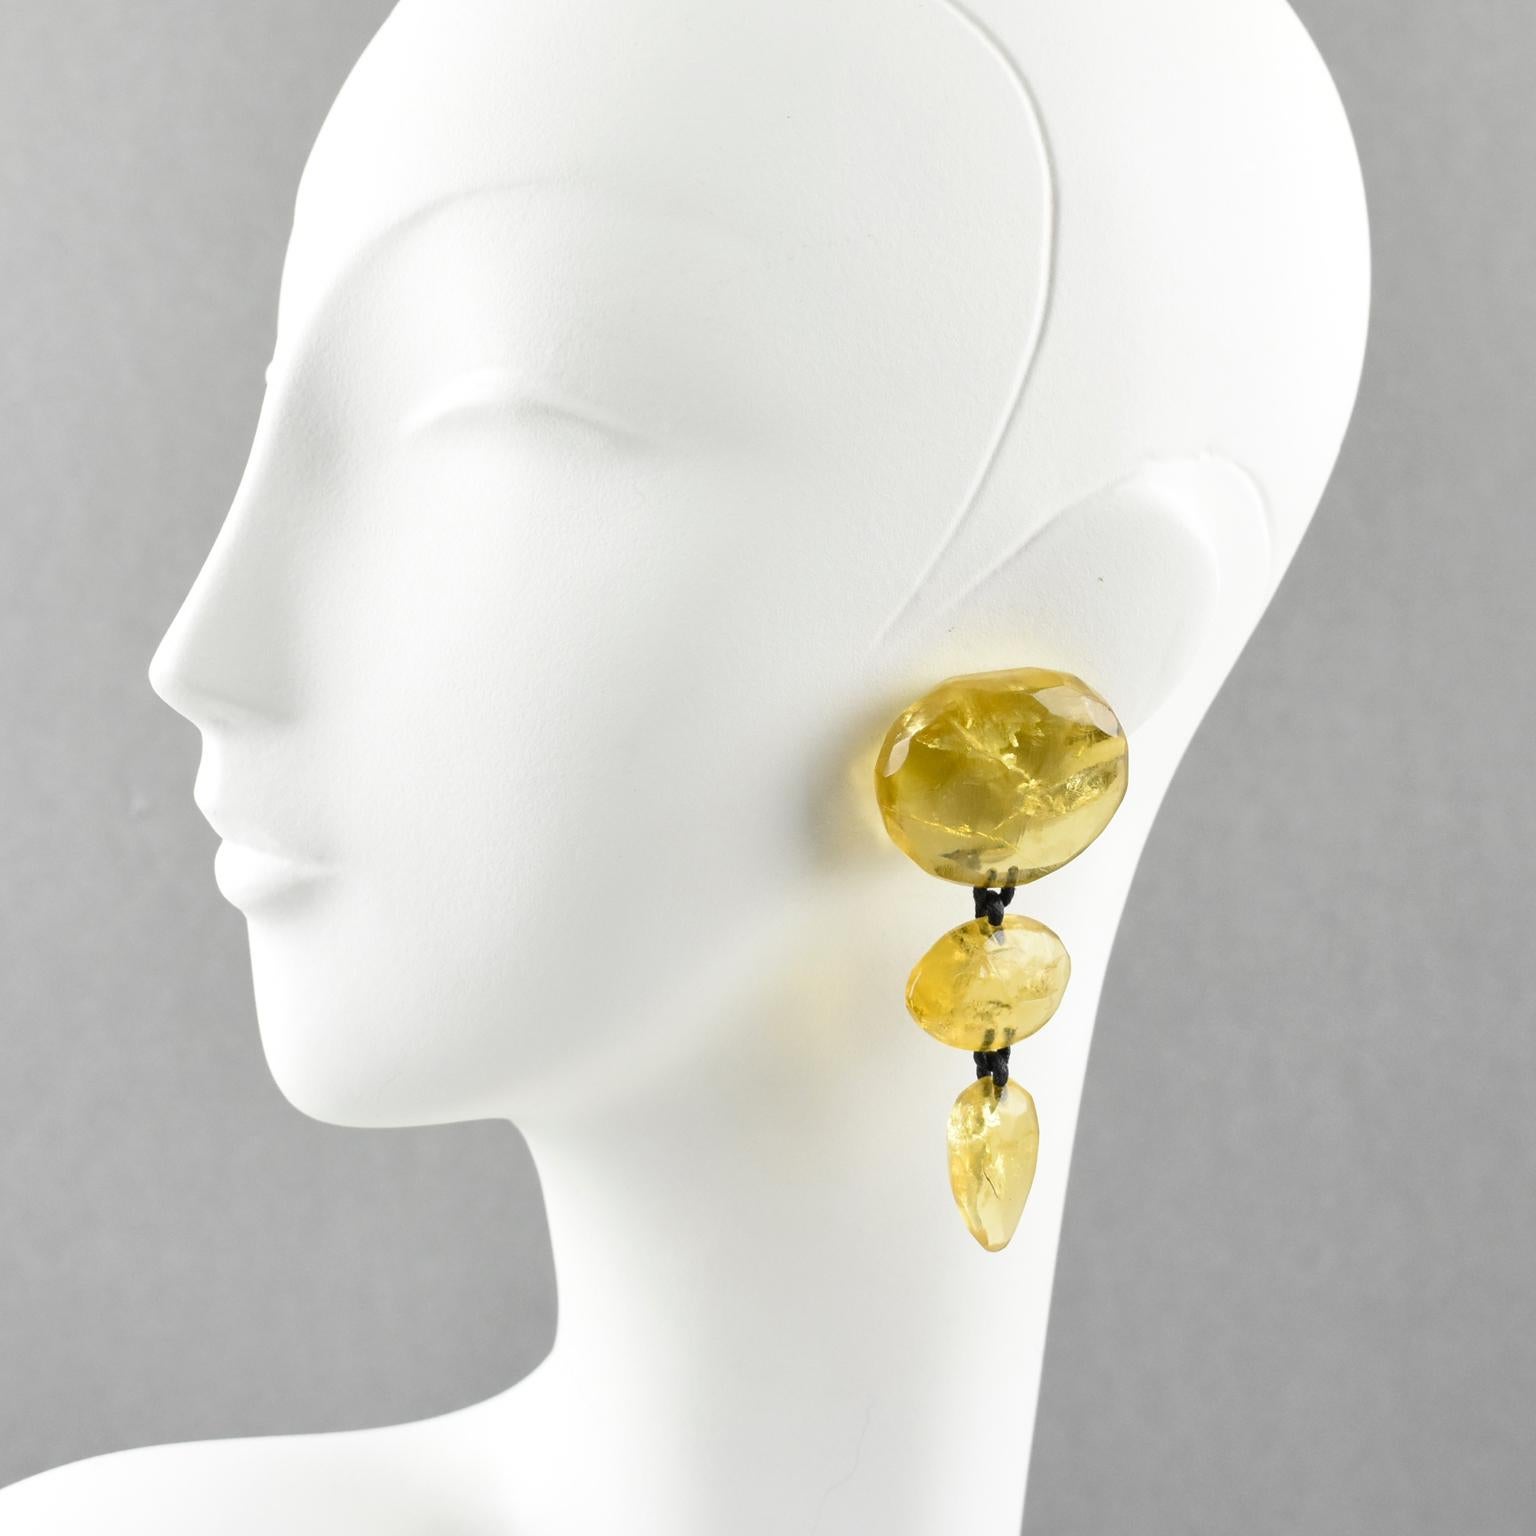 Stunning oversized clip on earrings by Gerda Lyngaard for Monies. Dangling pebble shape with golden amber Lucite or resin with inclusion. Marked 'Monies' on clasp. 
Measurements: 3.38 in. high (8.5 cm) x 1.44 in. wide (3.7 cm)